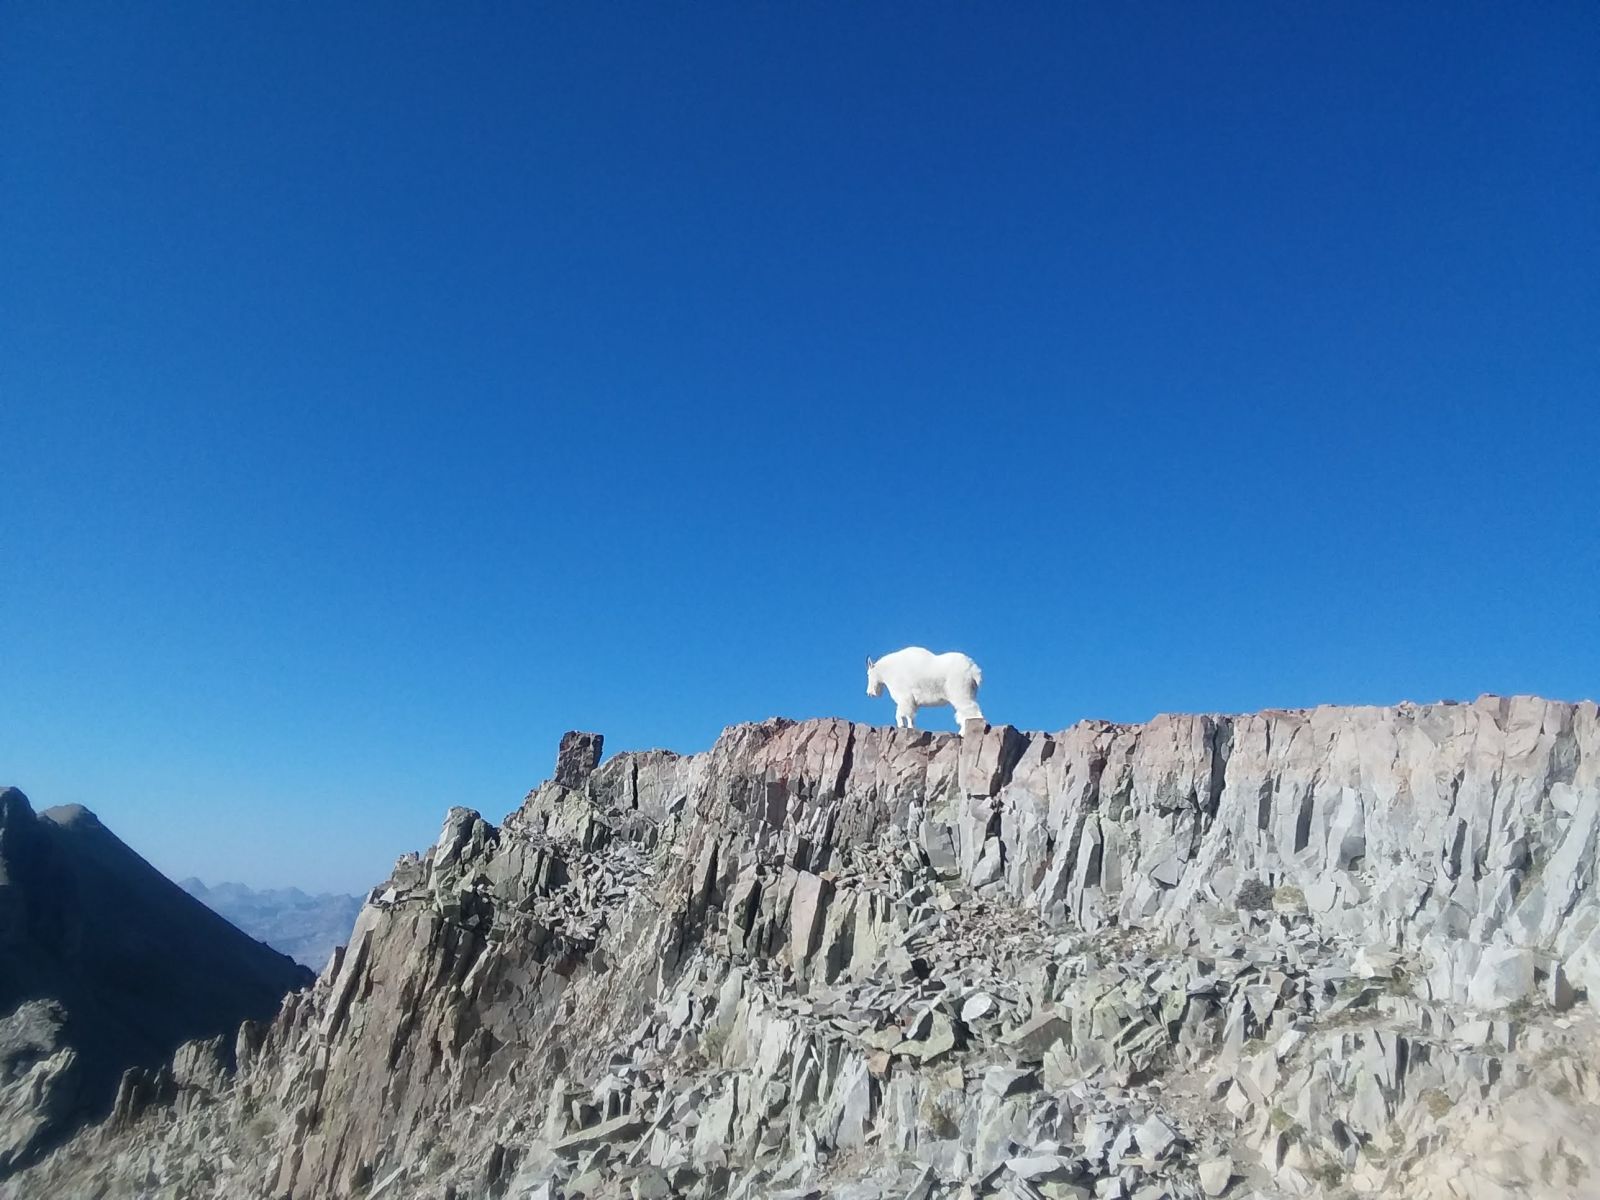 Right after I began my descent, I ran into this guy again! I will just assume it is the same goat because then that means he followed me up to the summit and we hiked down together. What a friend on my solo hike!